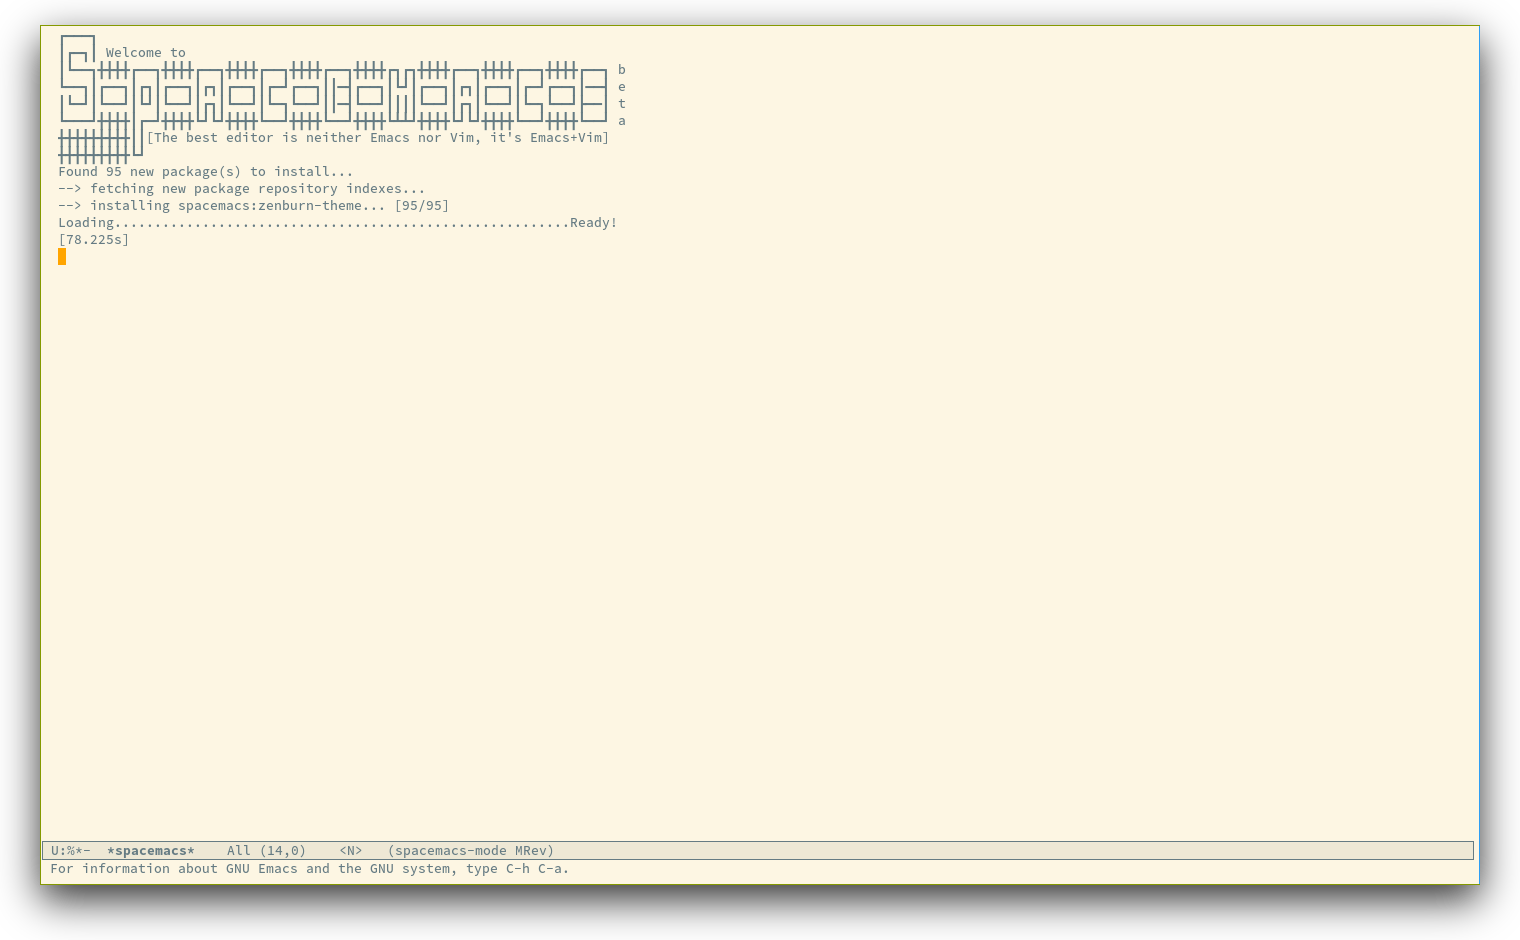 /TakeV/spacemacs/media/commit/2e8f62cc2204df39a86f0816a246dfce12aebac7/doc/img/spacemacs-startup.png